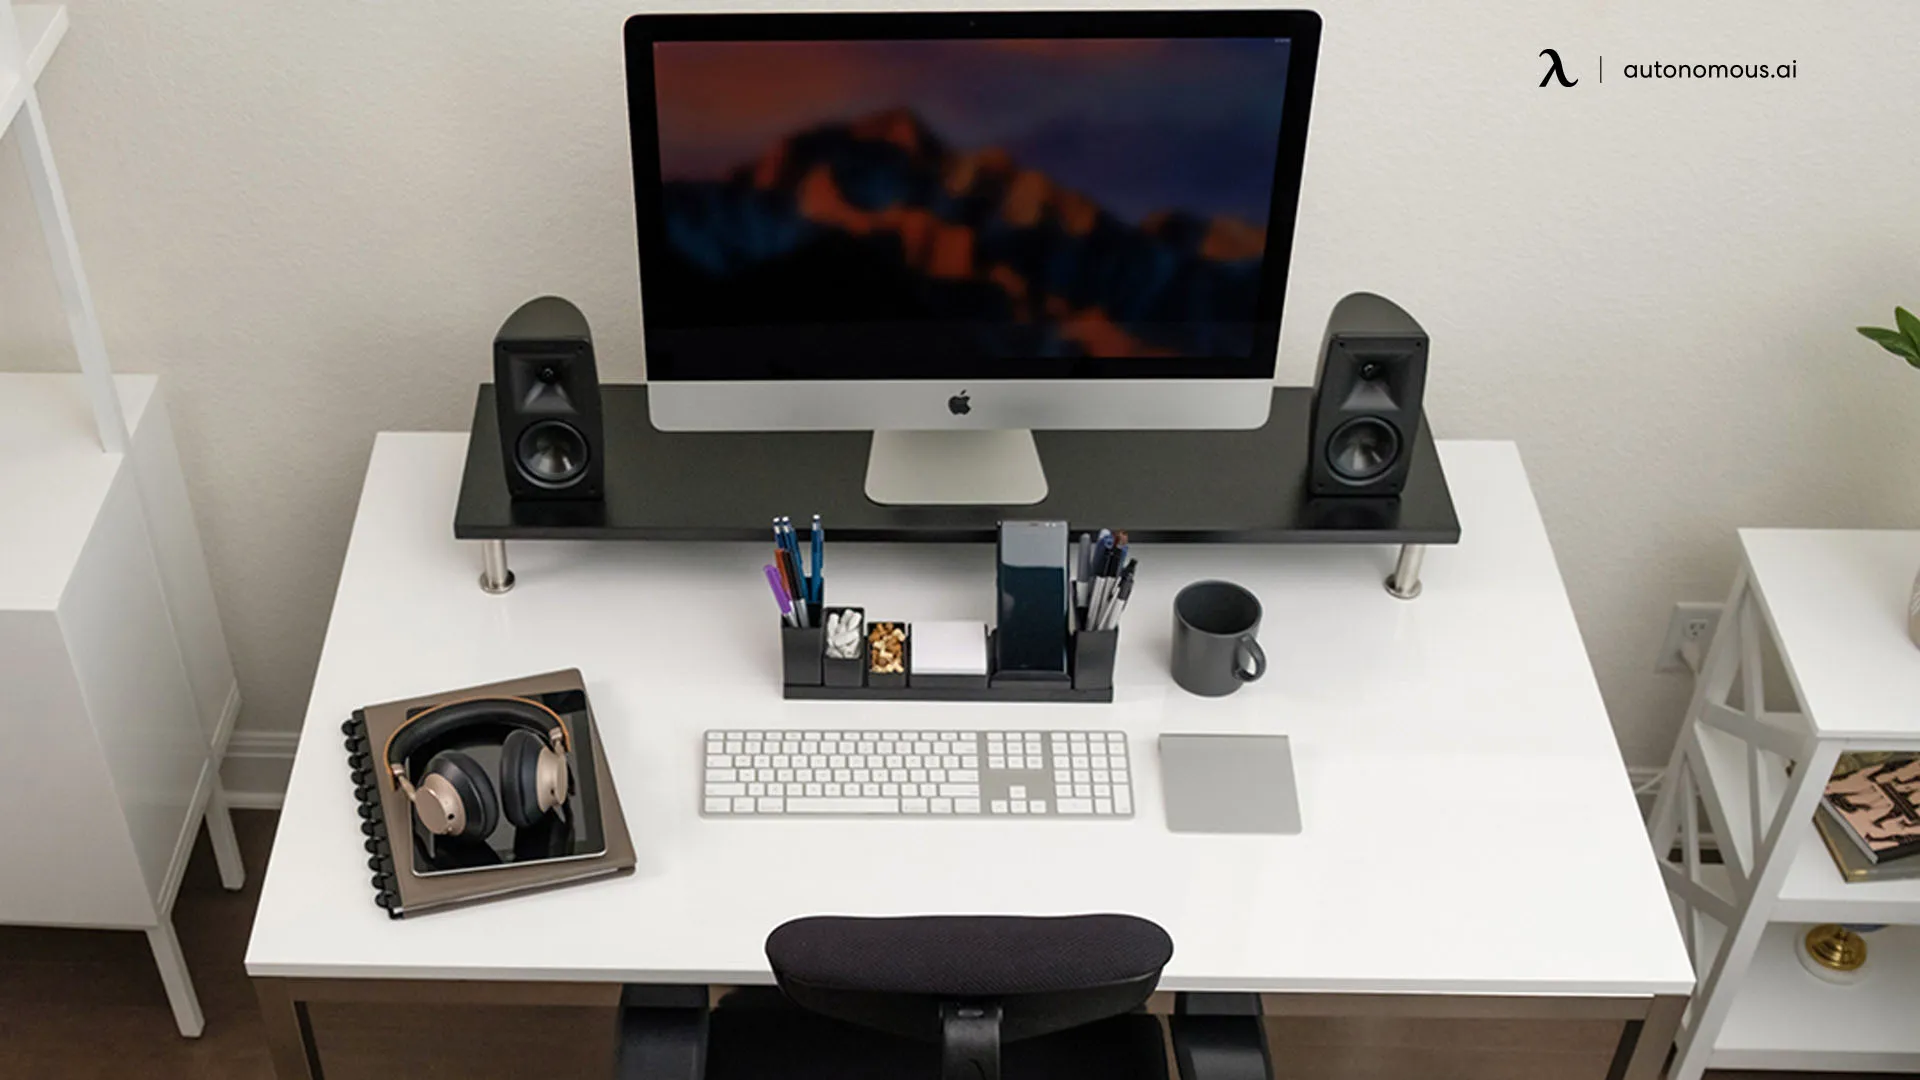 The Office Oasis Magnetic Desk Organizer